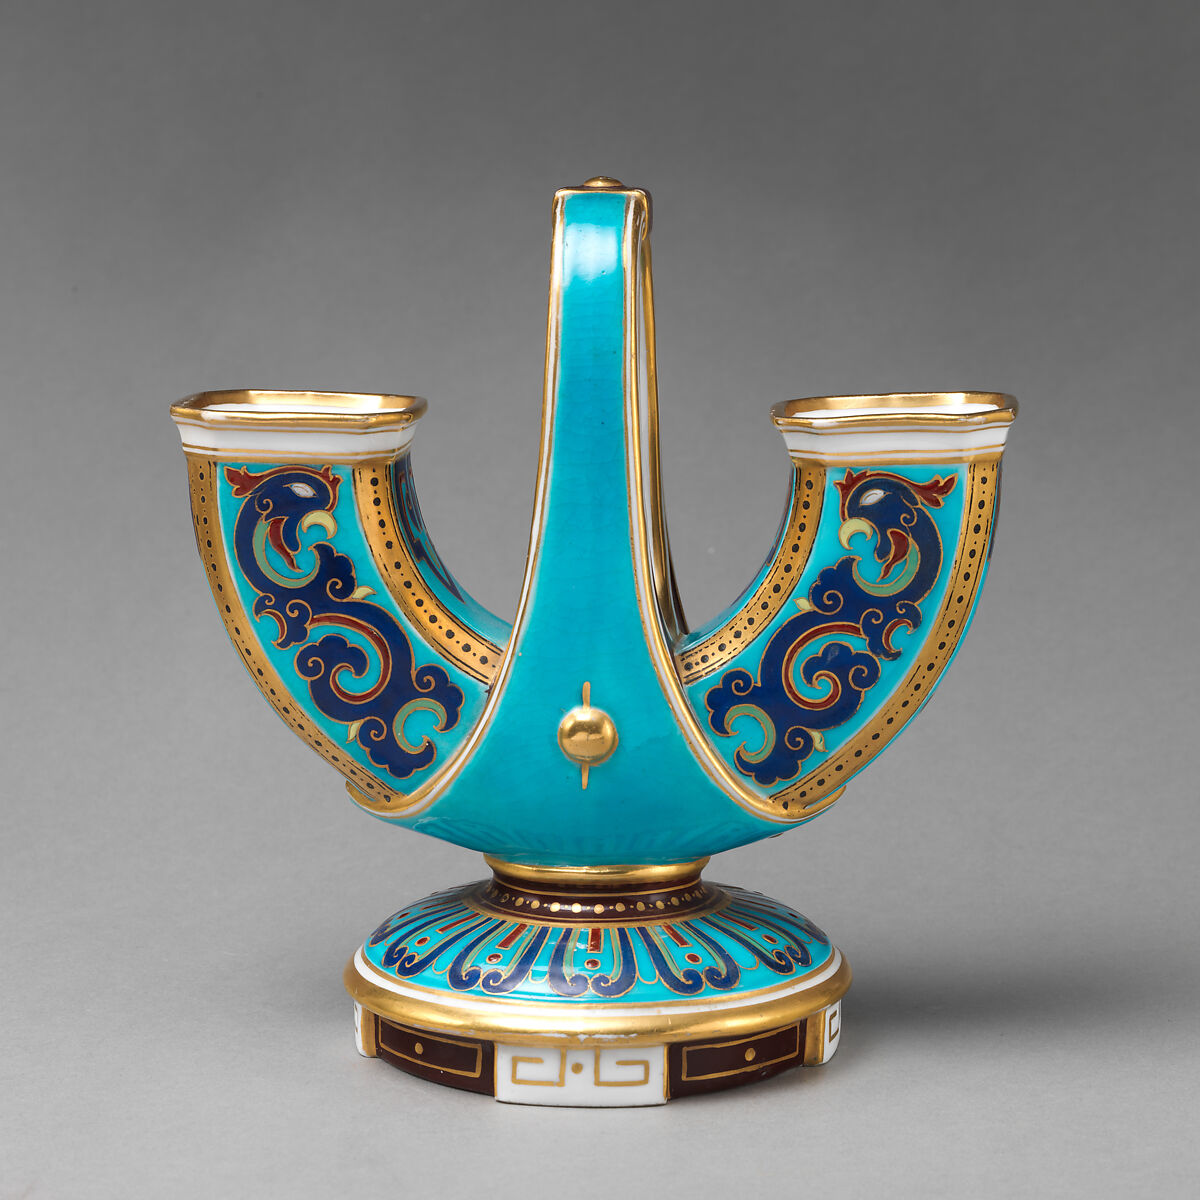 U-shaped vase with handle (one of a pair), Minton(s) (British, Stoke-on-Trent, 1793–present), Bone china, British, Stoke-on-Trent, Staffordshire 